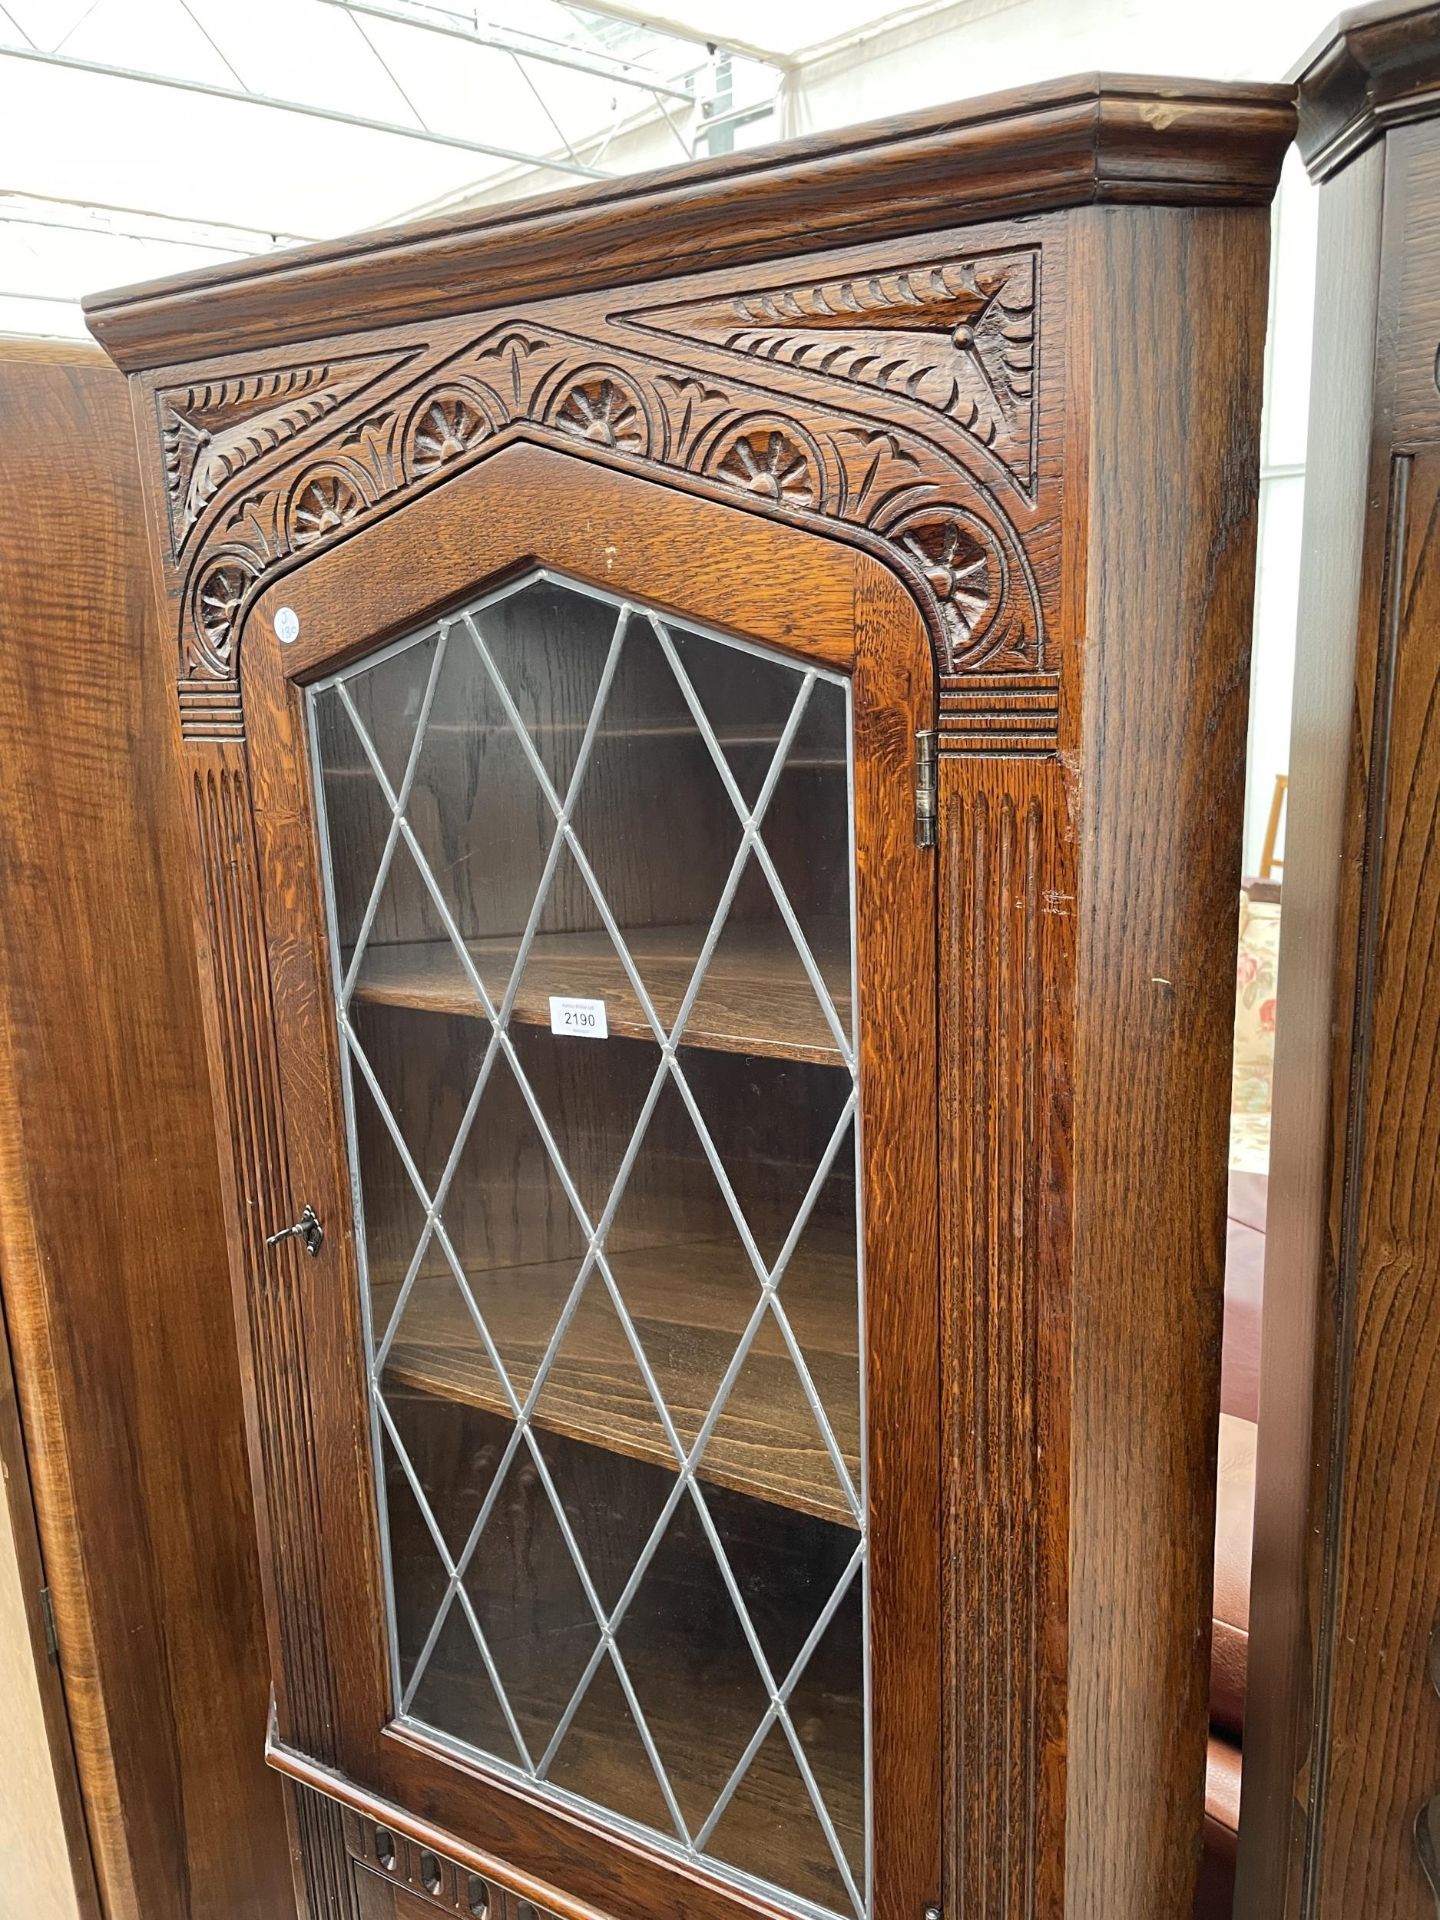 AN OAK OLD CHARM STYLE CORNER CABINET - Image 2 of 3